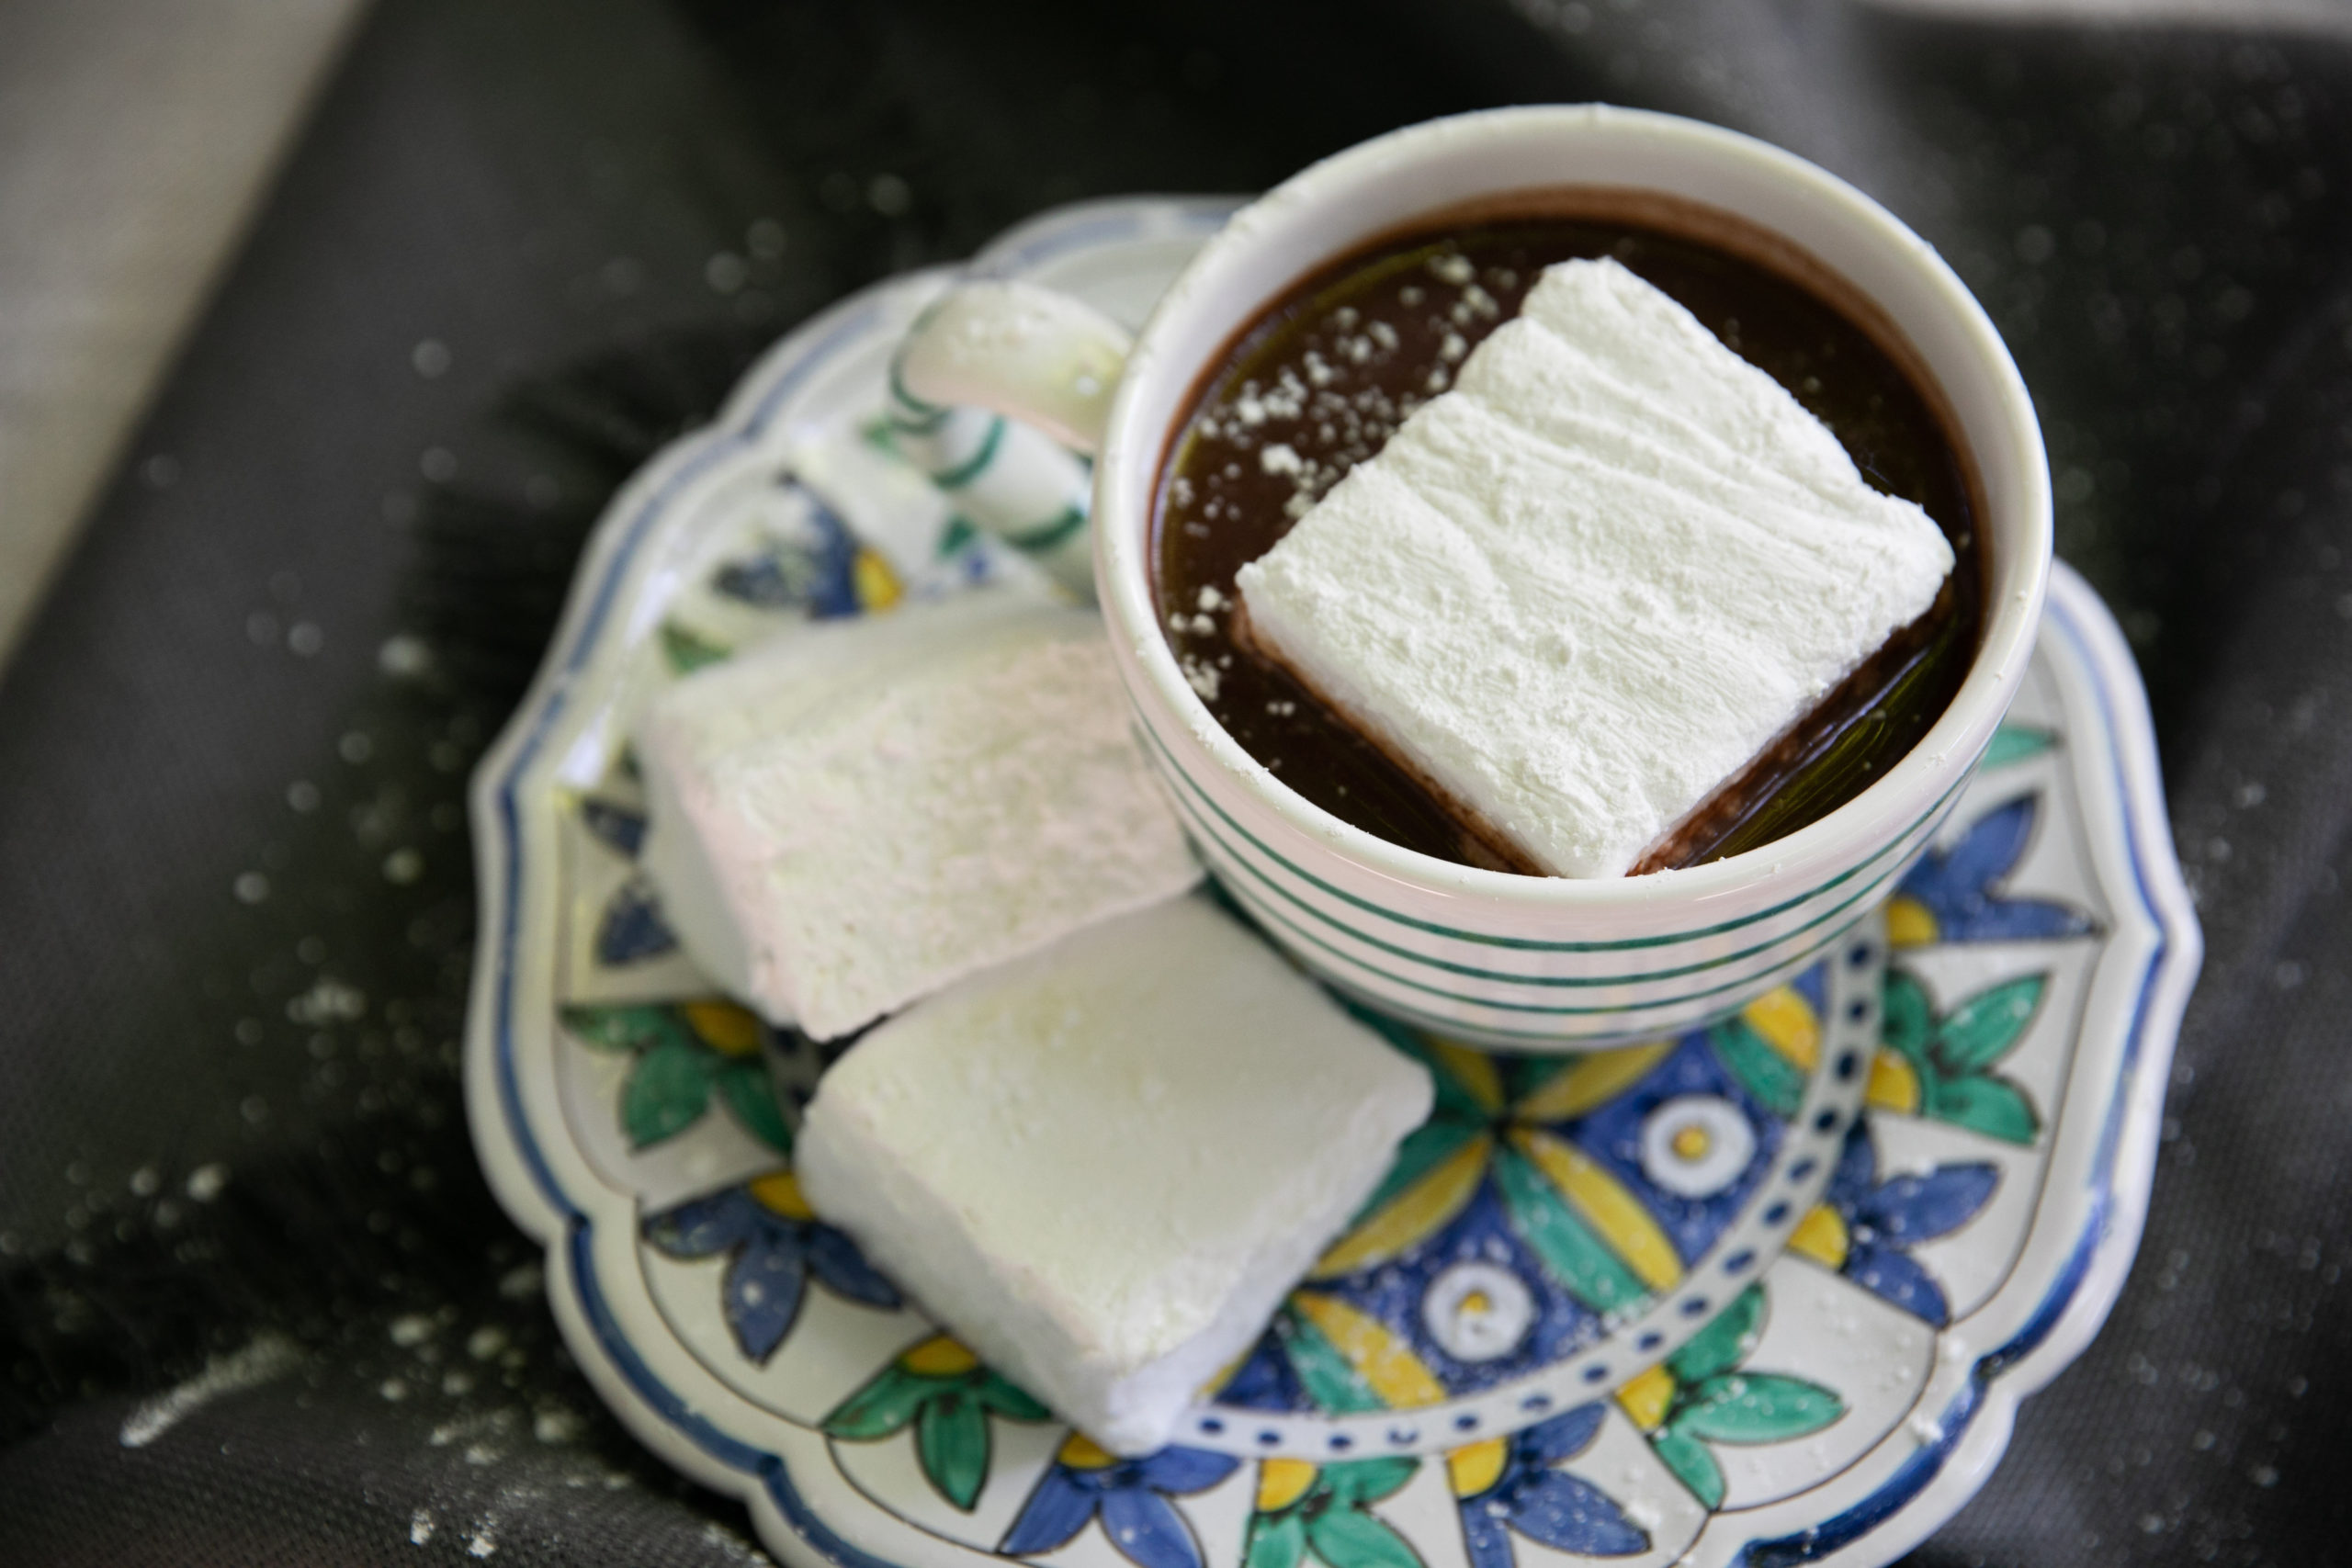 Hot chocolate with homemade marshmallows, one of the recipes in the winter Loaves & Fishes Farm Series trio of cookbooks.